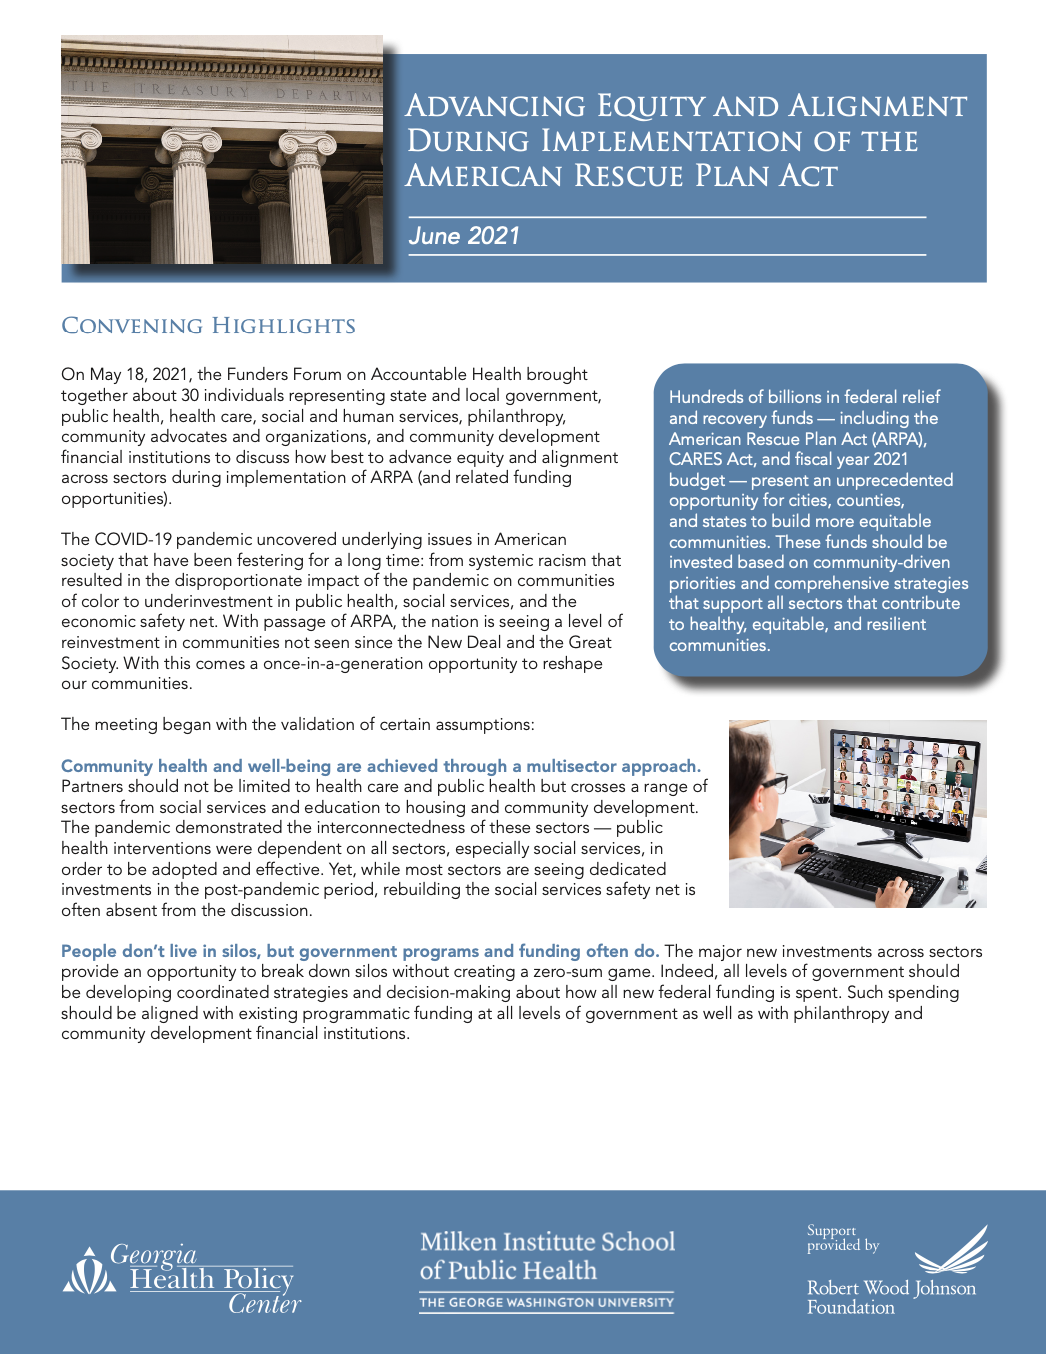 Advancing Equity and Alignment During Implementation of the American Rescue Plan Act